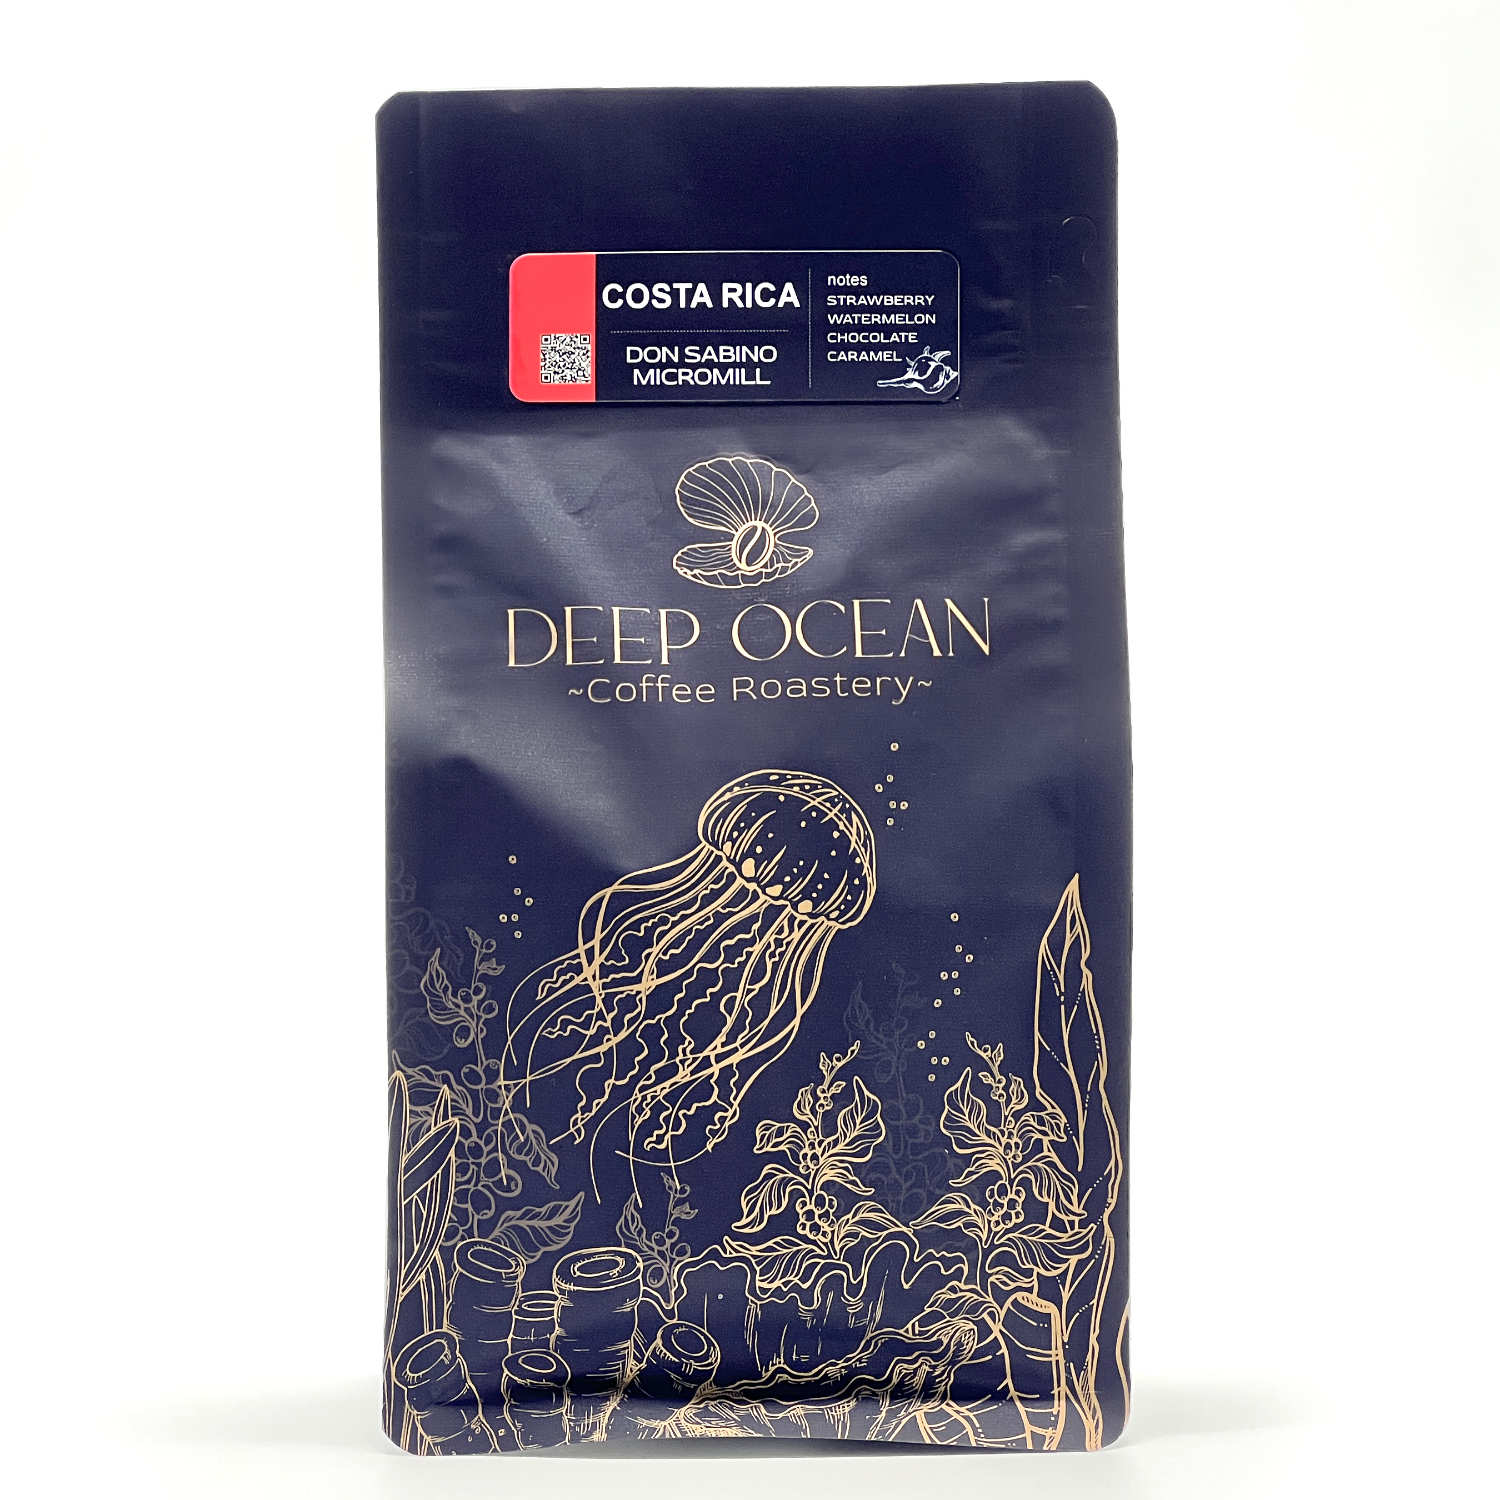 variant 1 - medium roasted coffee Costa Rica is great choice of specialty coffee.